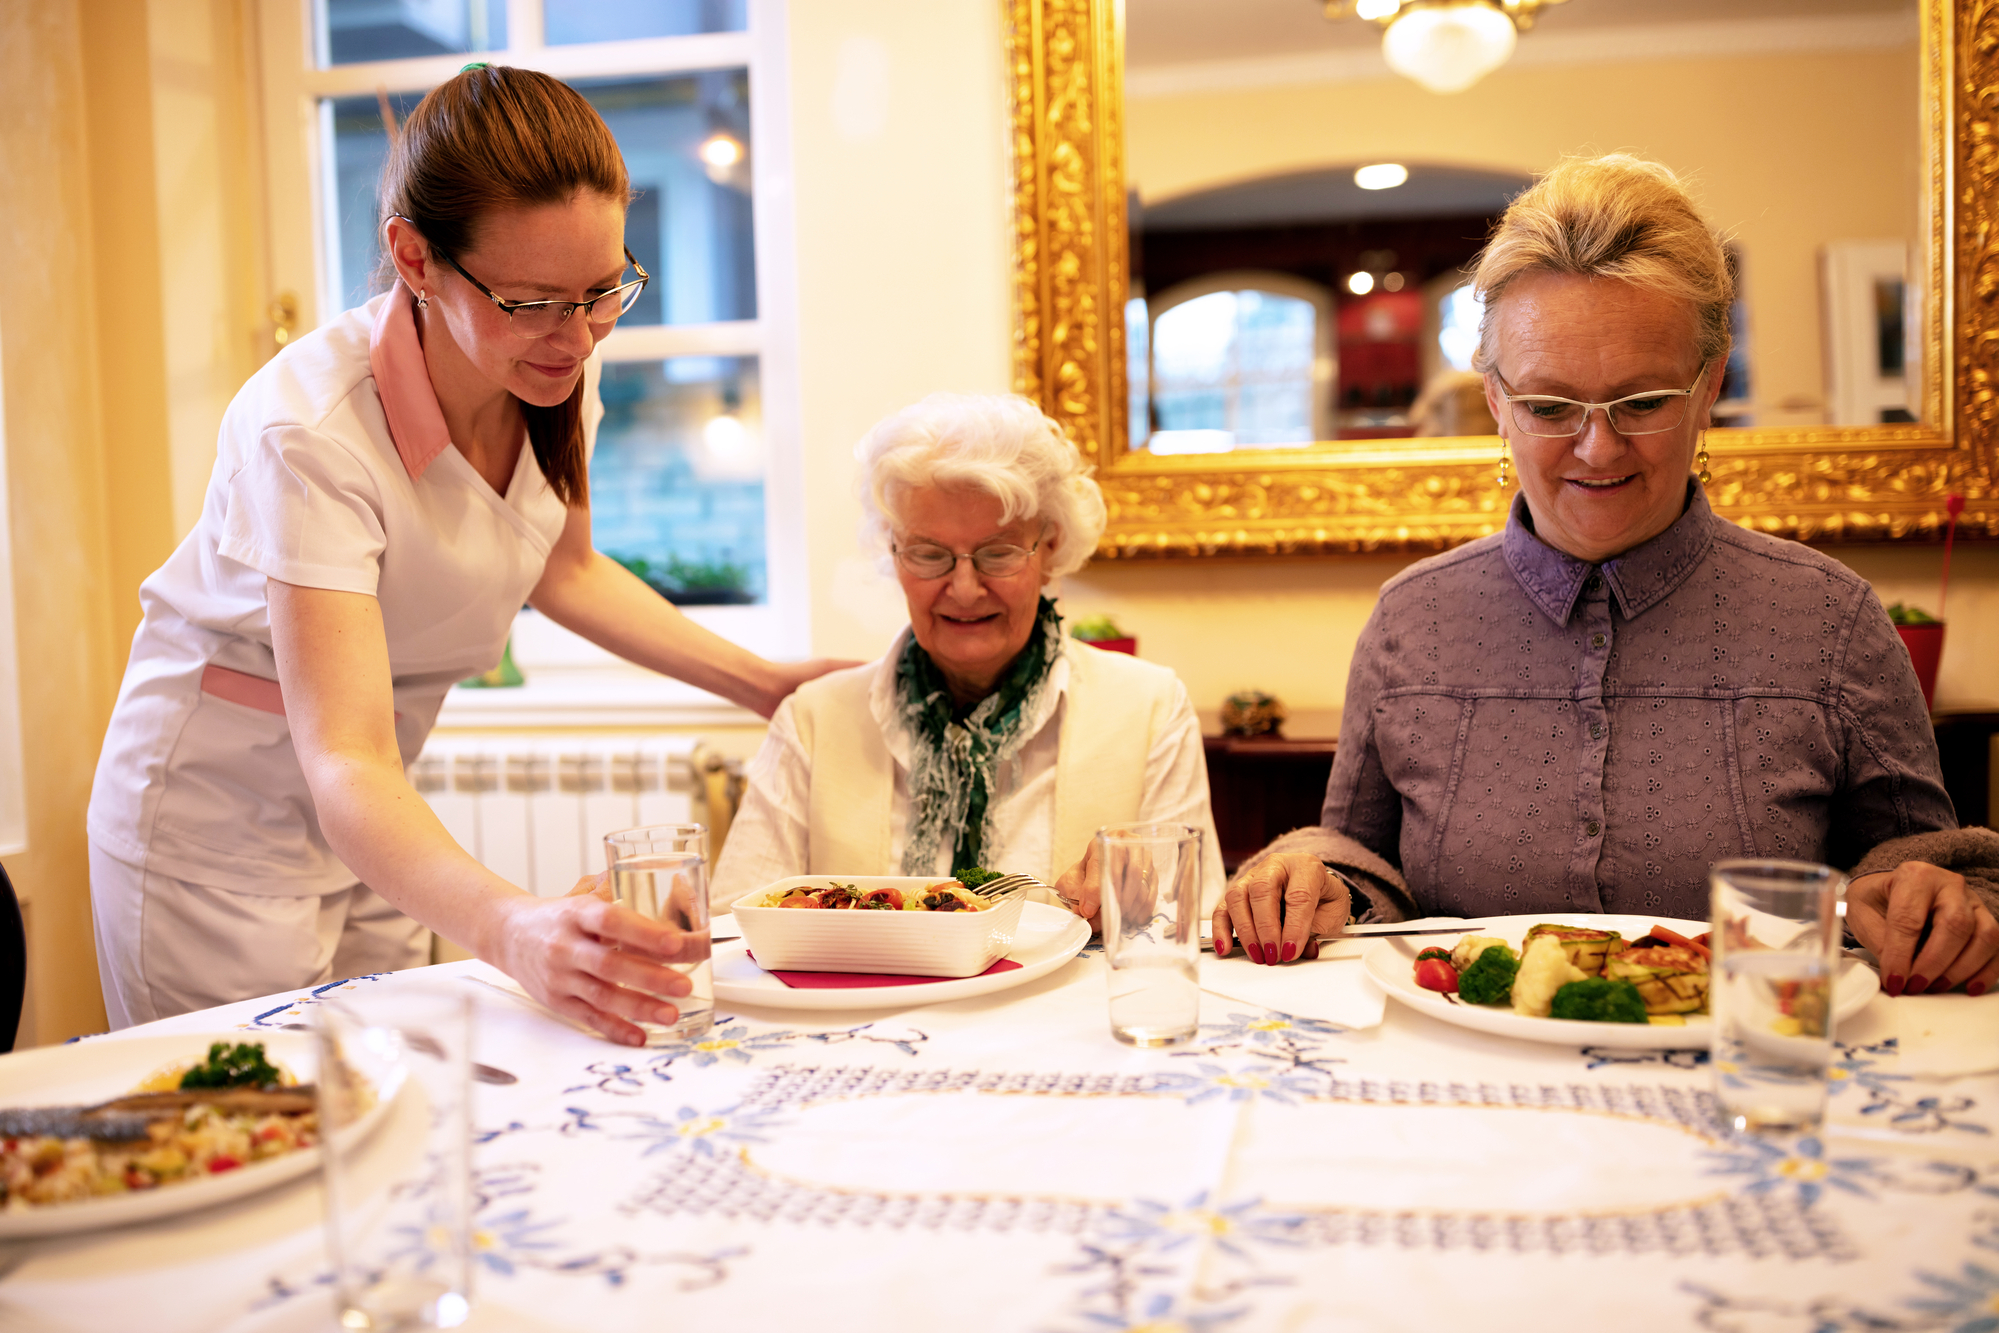 Caring nurse serving meals for dinner and attending people in a retirement home